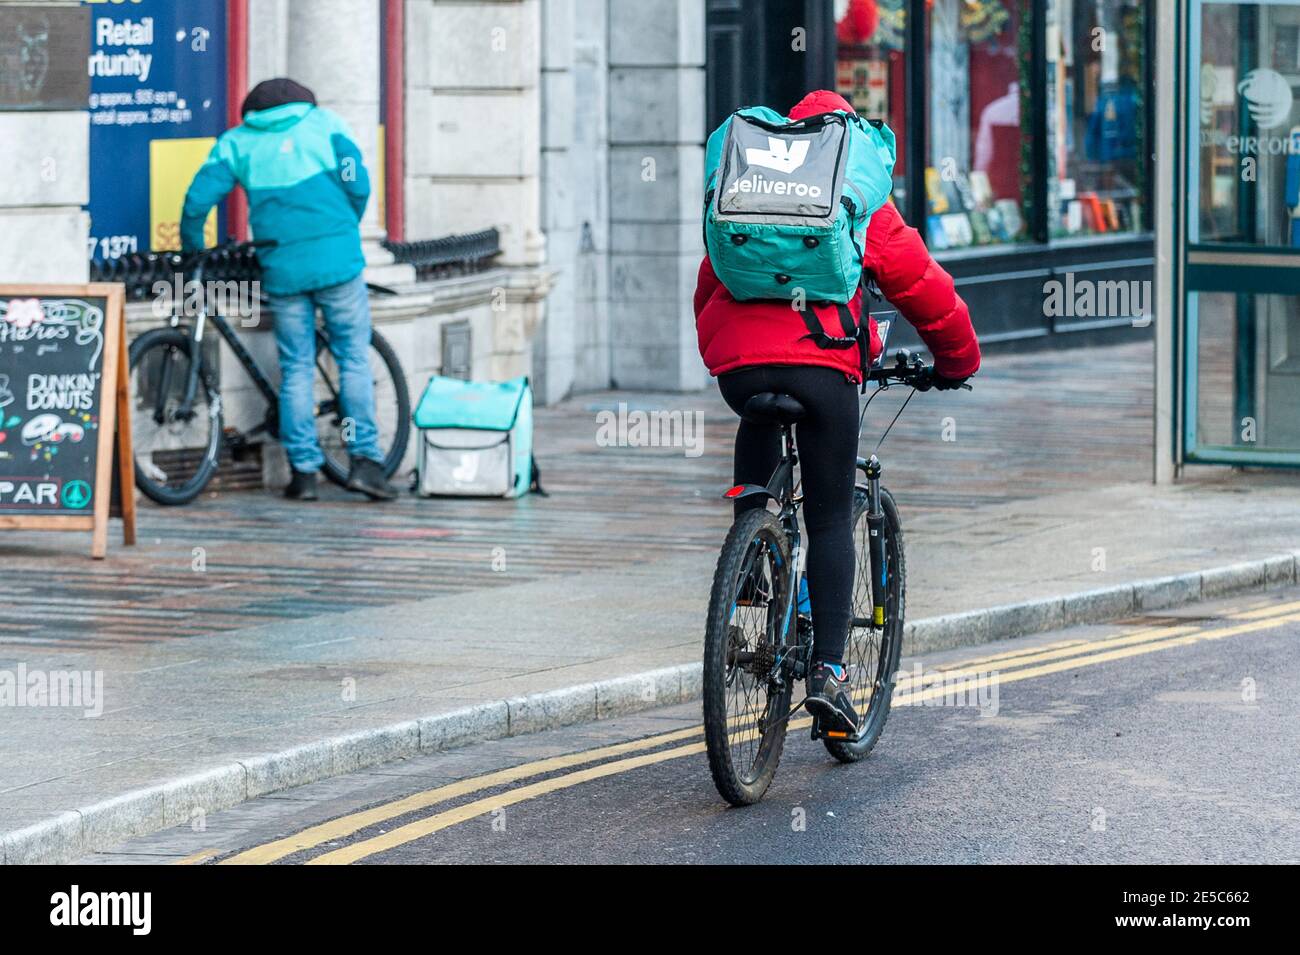 Deliveroo food delivery riders in Cork city, Ireland. Stock Photo